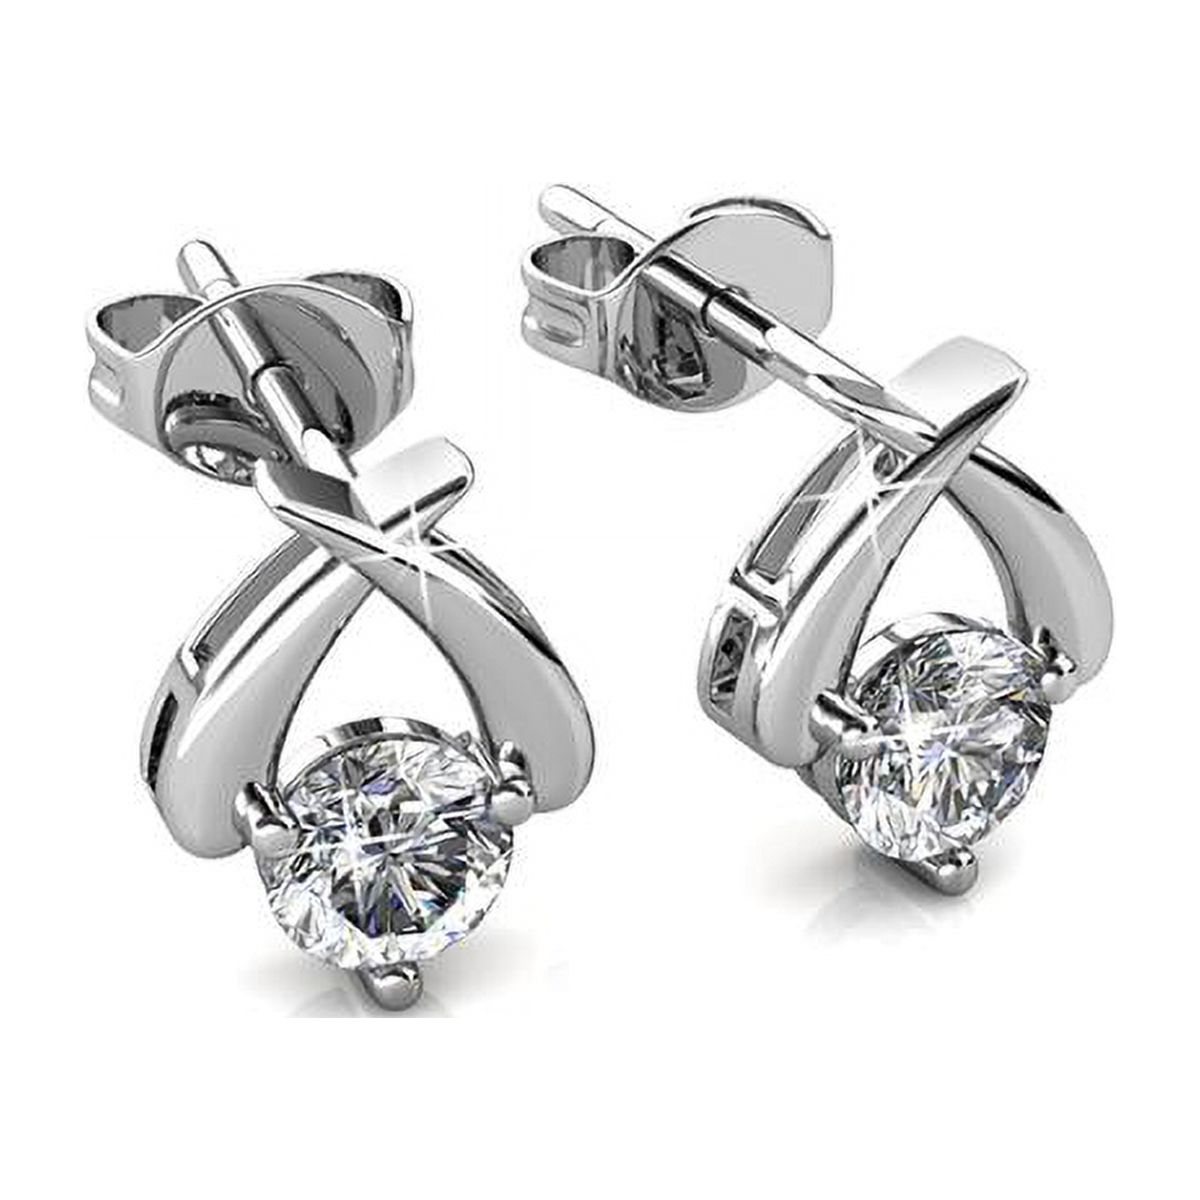 Cate & Chloe Eloise Modest Unique White Gold Stud Halo Earrings, 18k White Gold Plated Studs with Swarovski Crystals, Geometric Stud Earring Set Solitaire Round Cut Crystals - image 3 of 5